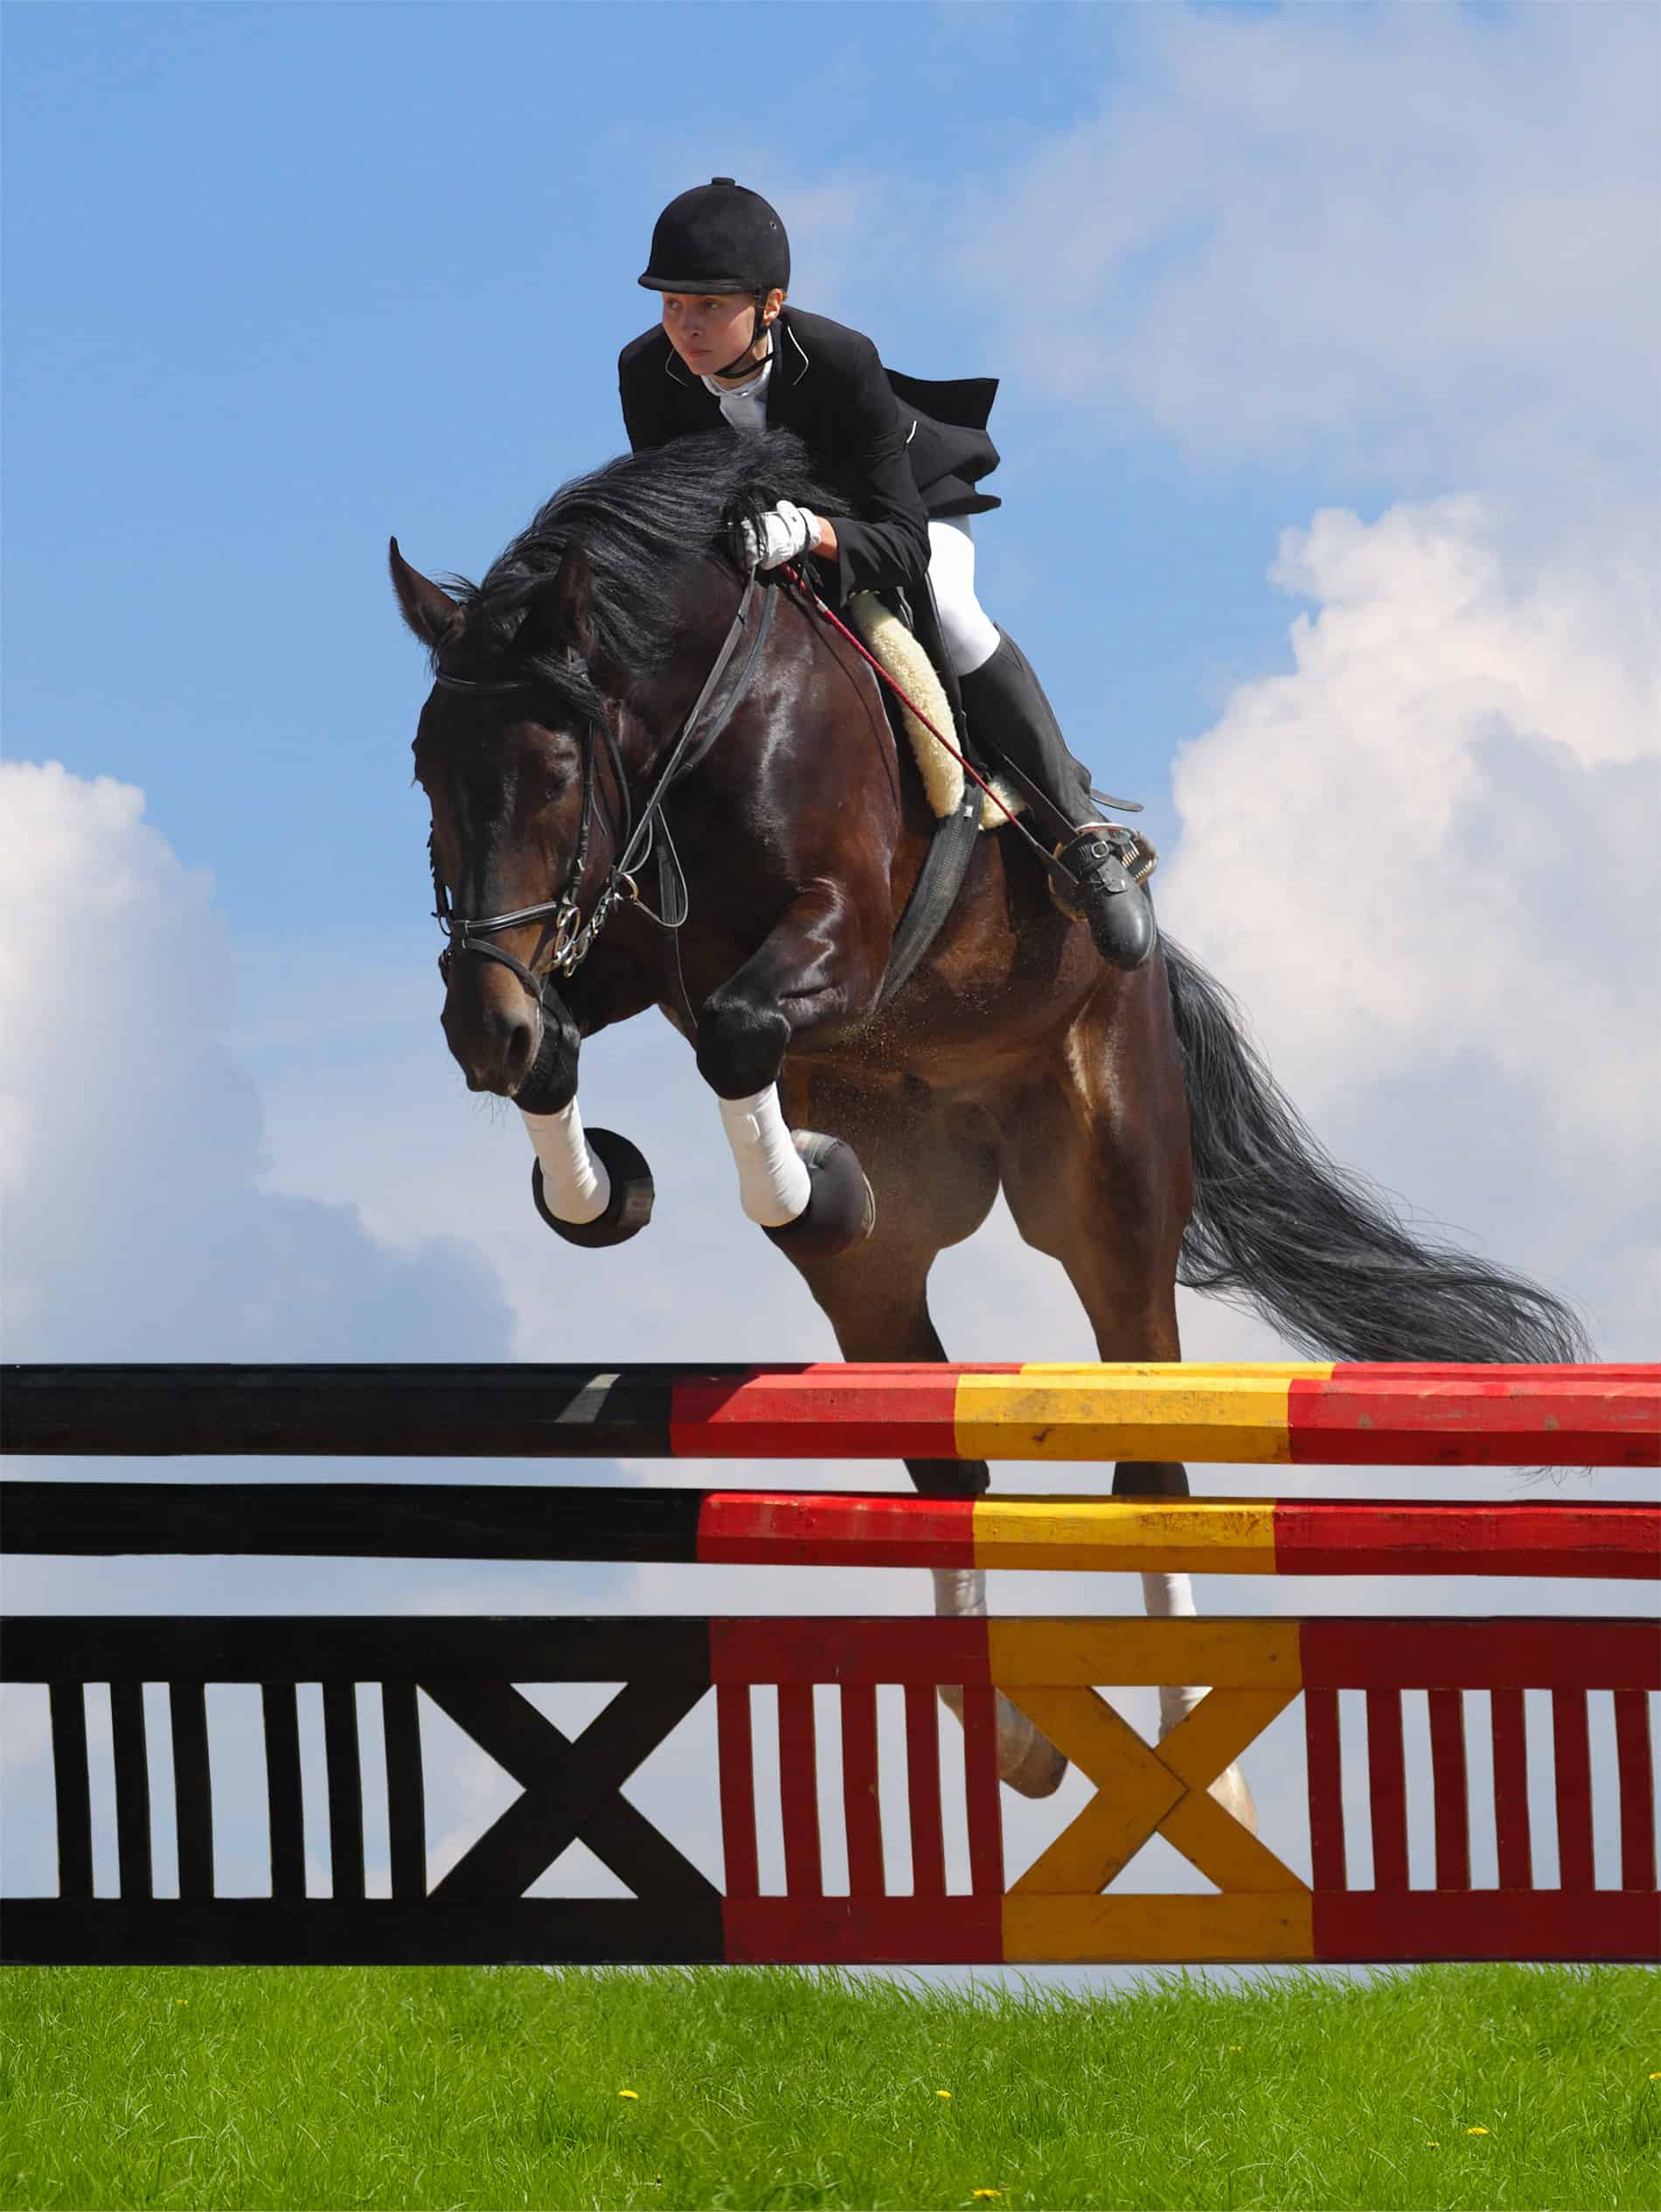 show jumping - woman and horse horseback riding styles